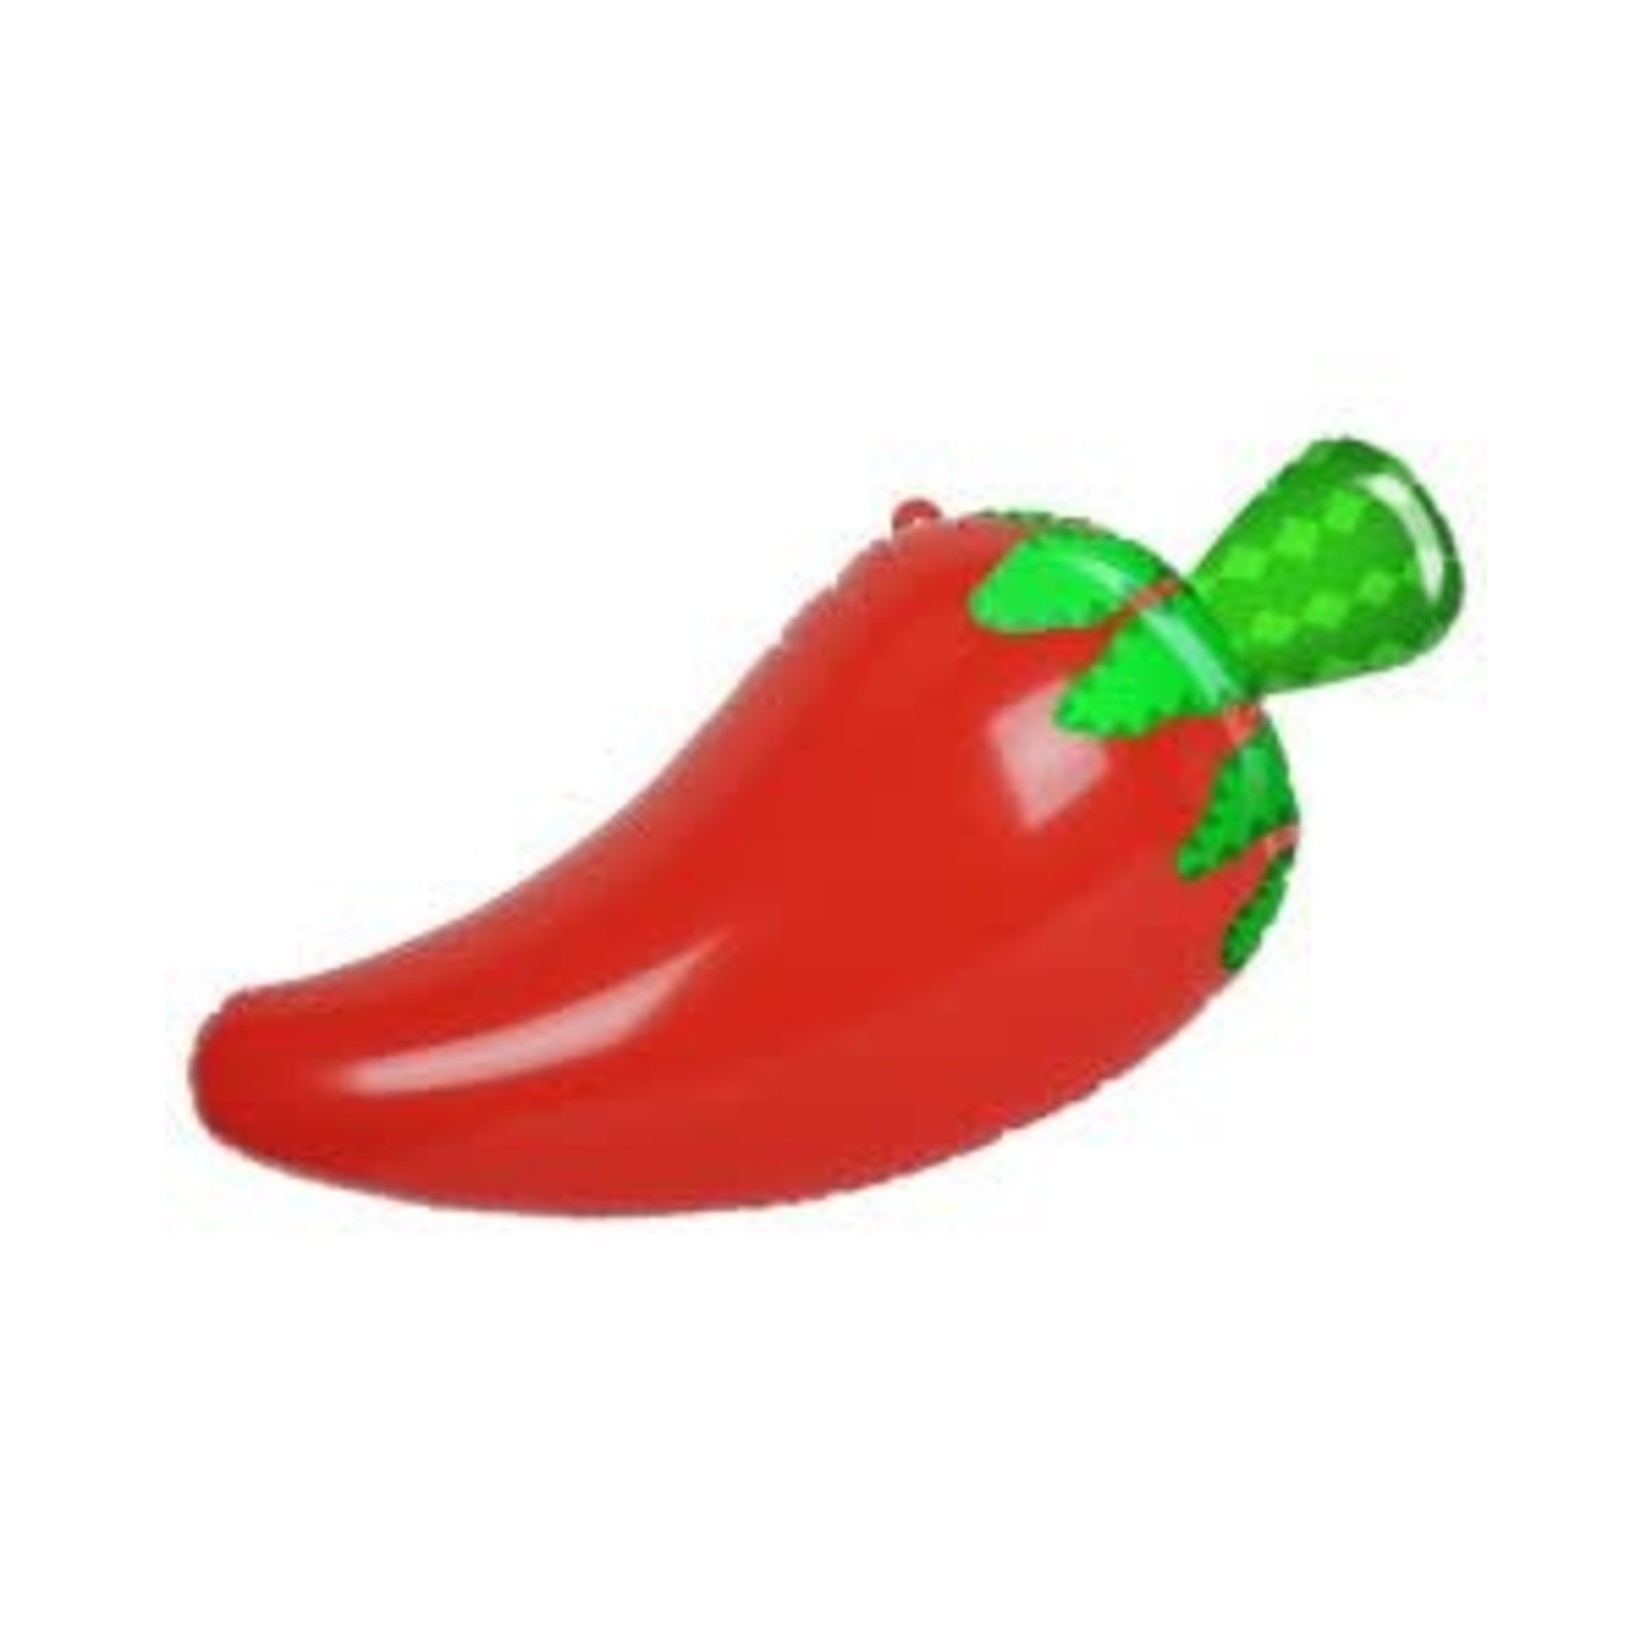 Beistle 30" Inflatable Chili Pepper - 1ct.